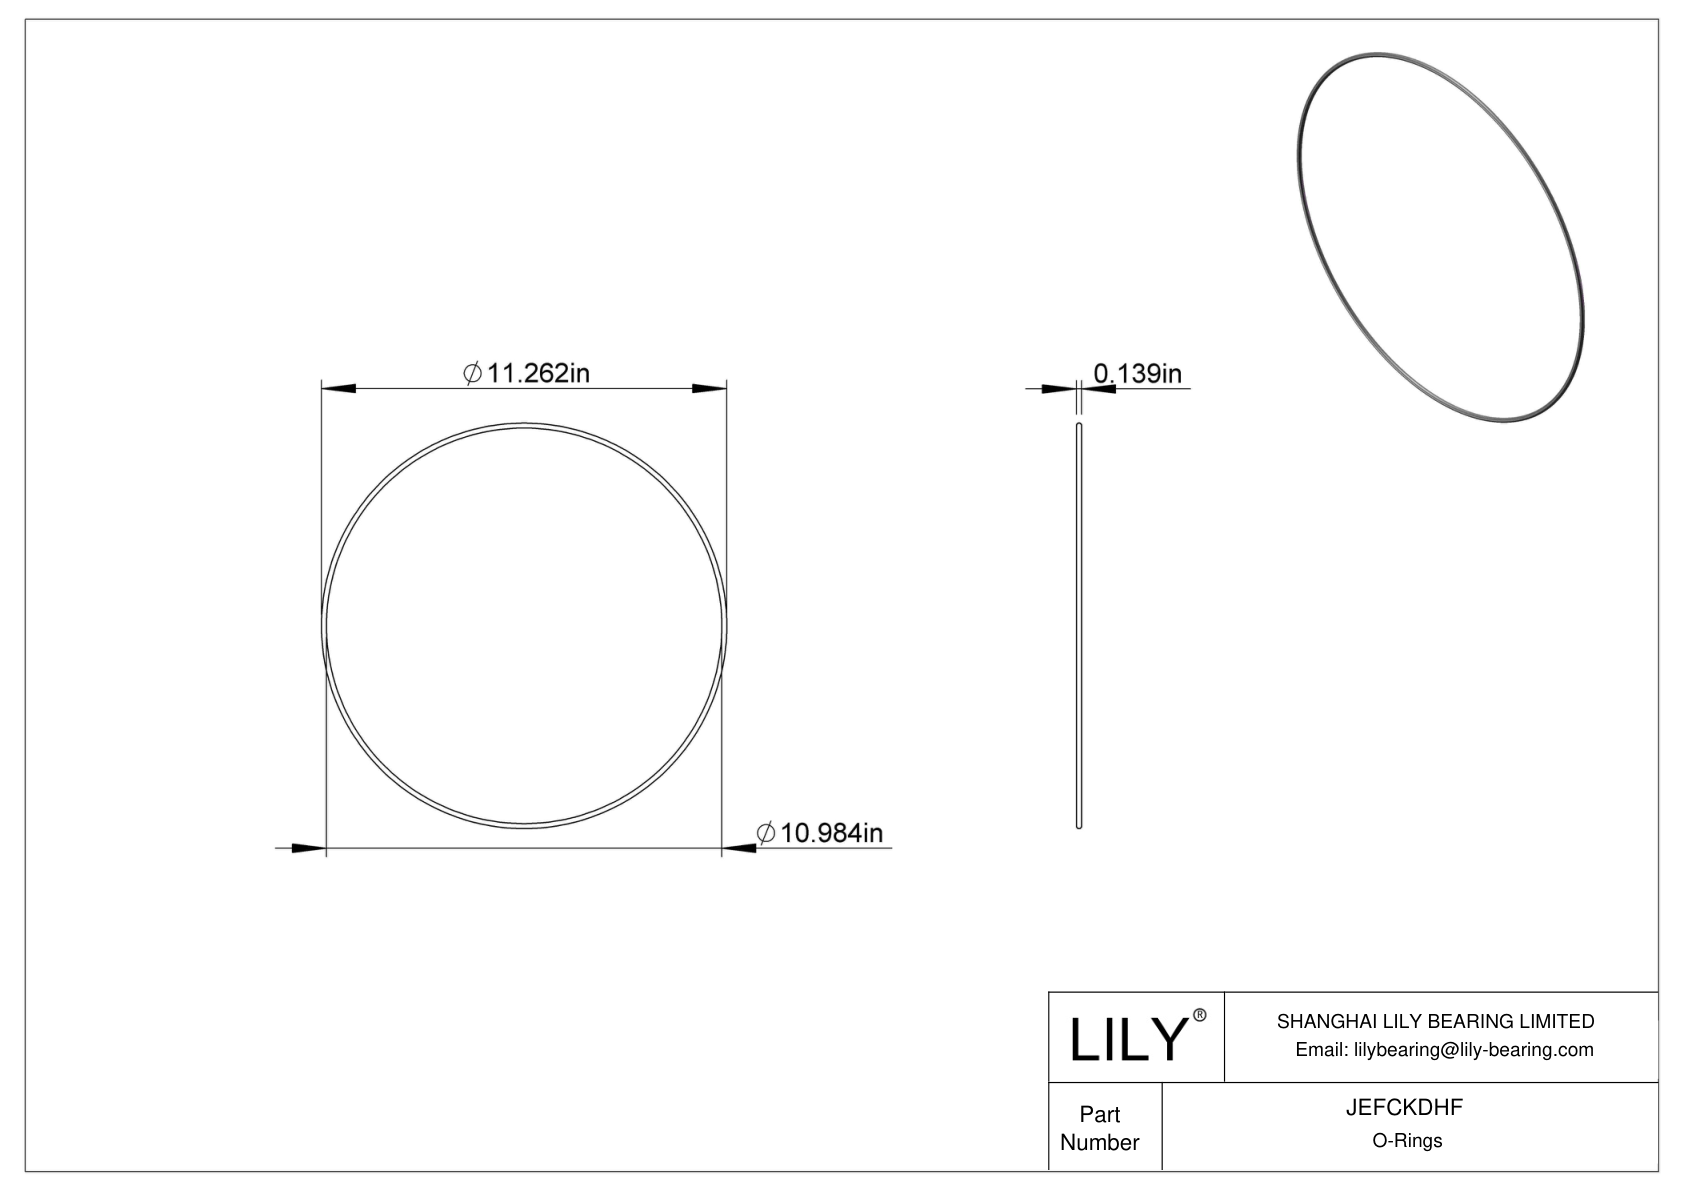 JEFCKDHF Oil Resistant O-Rings Round cad drawing